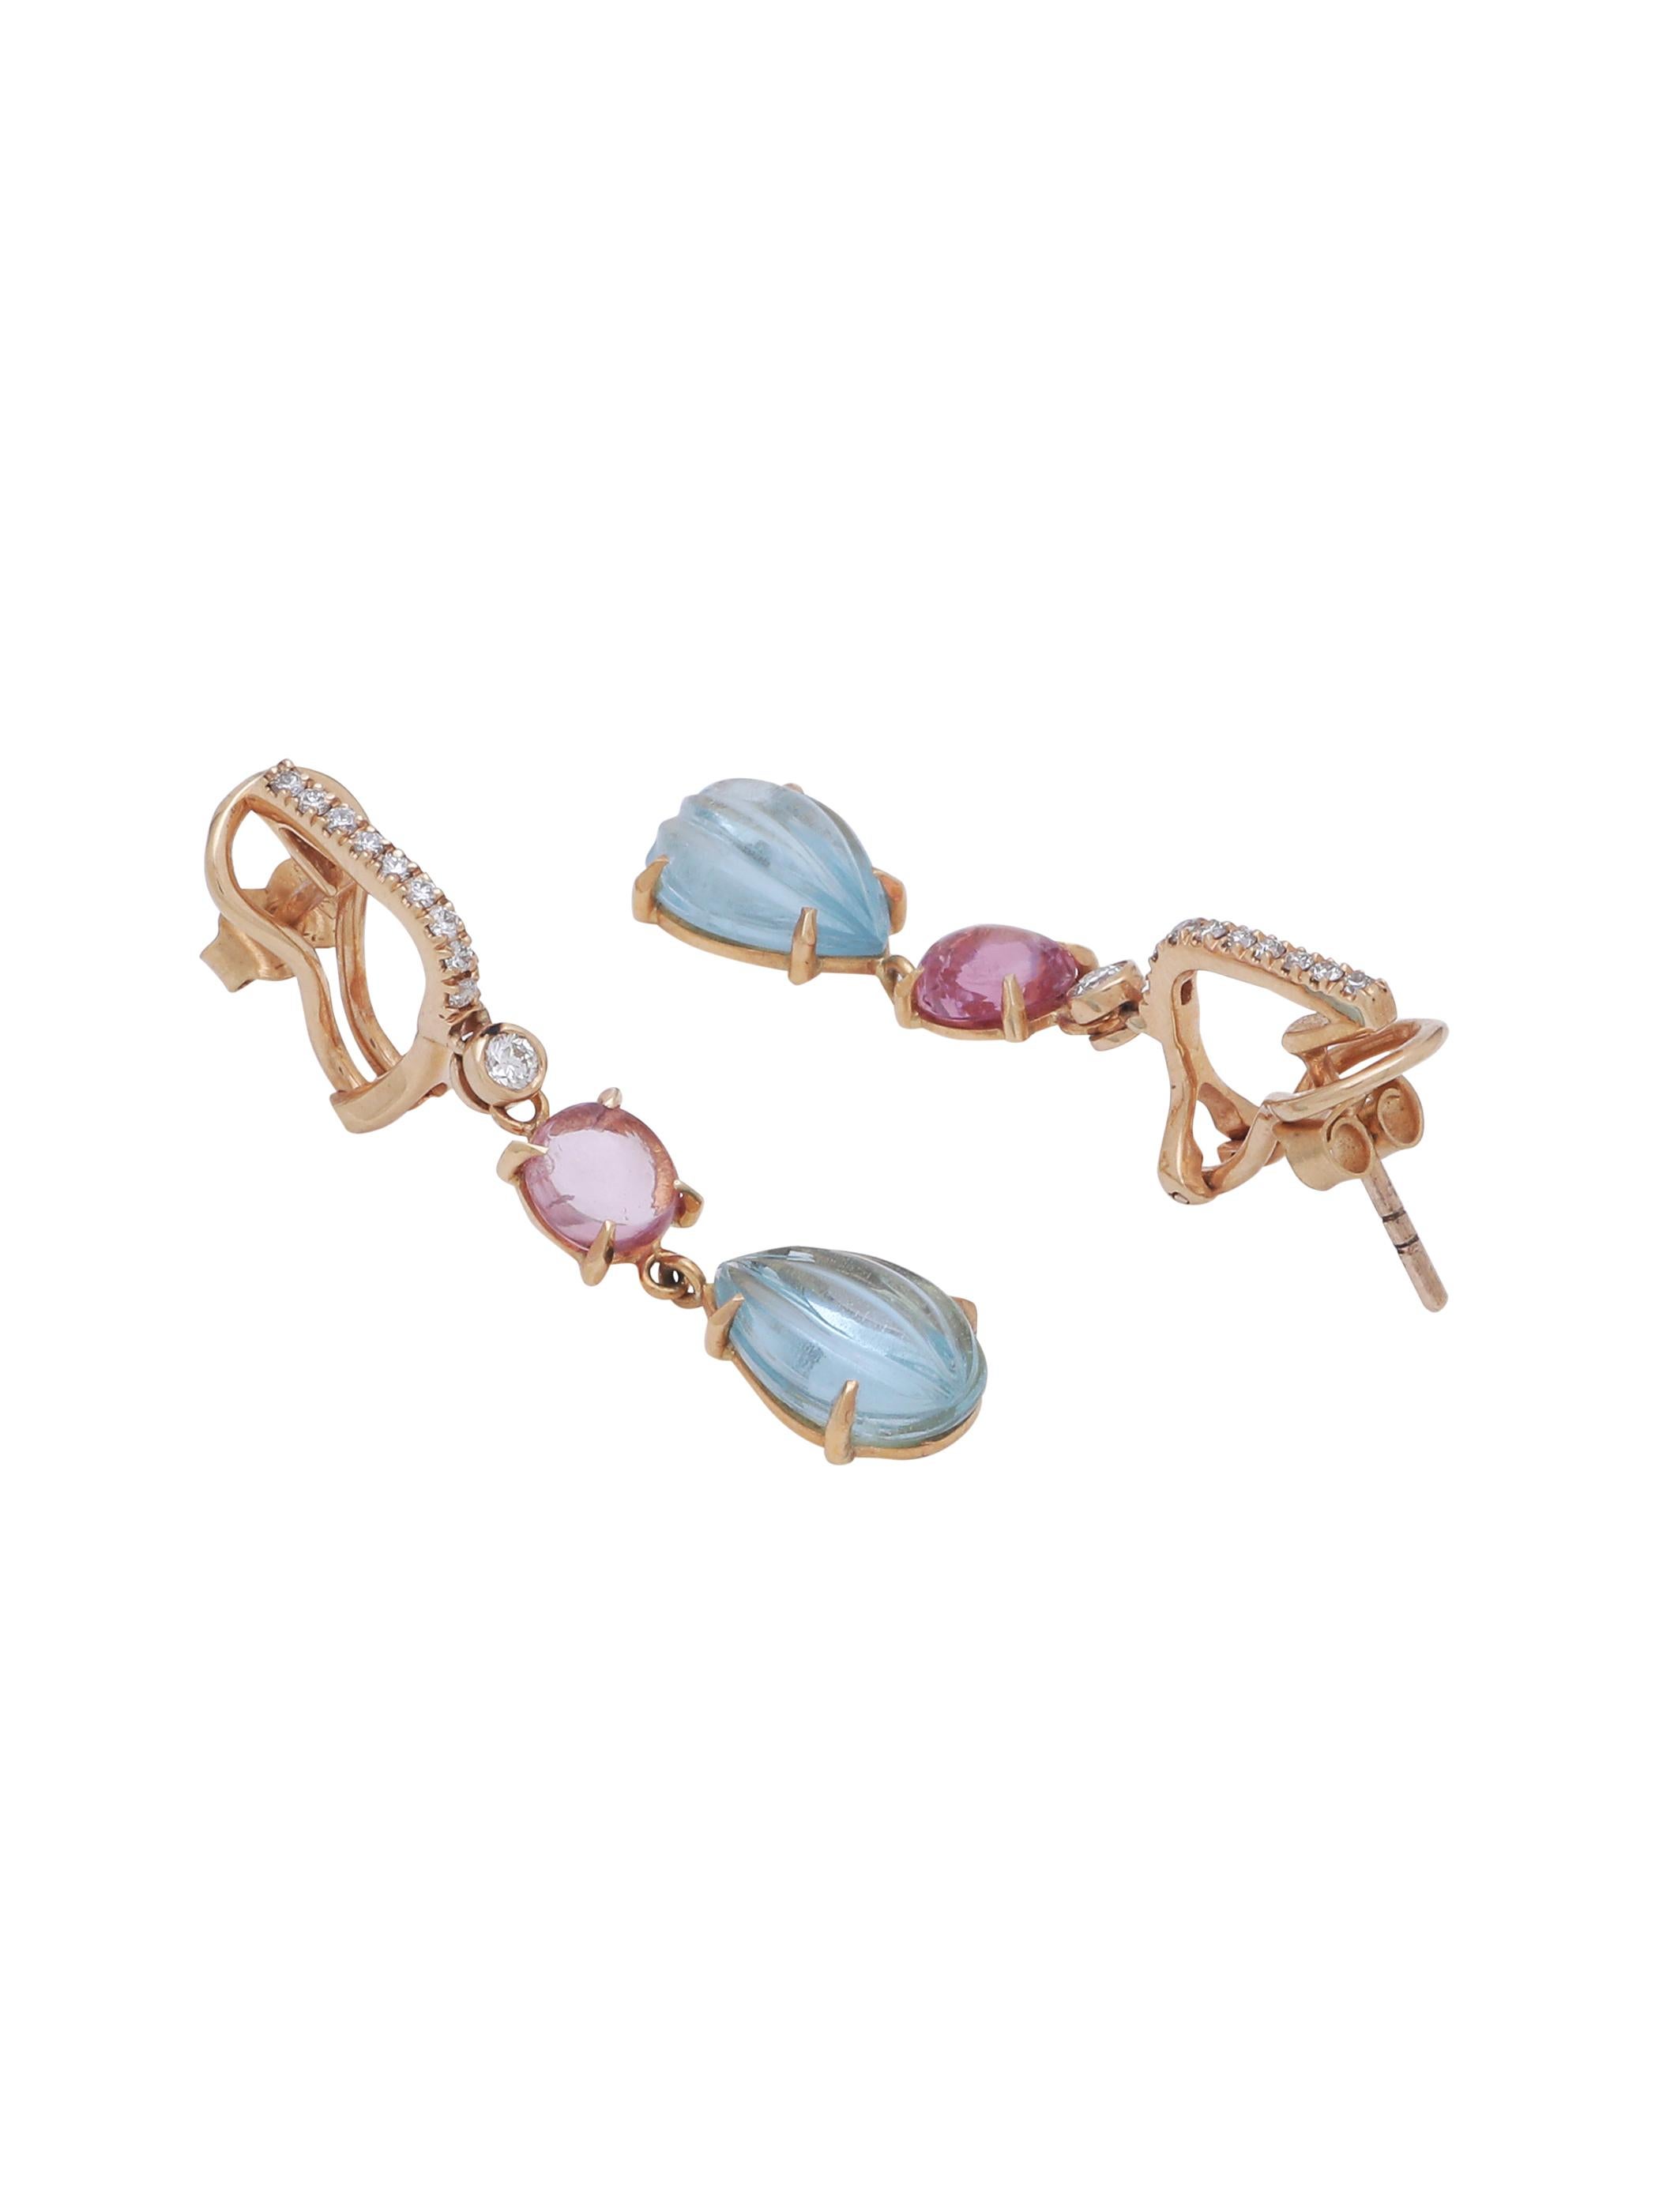 Aquamarine Carved and Spinel Cabochon Earrings in 18k Gold with Diamonds In New Condition For Sale In Jaipur, IN